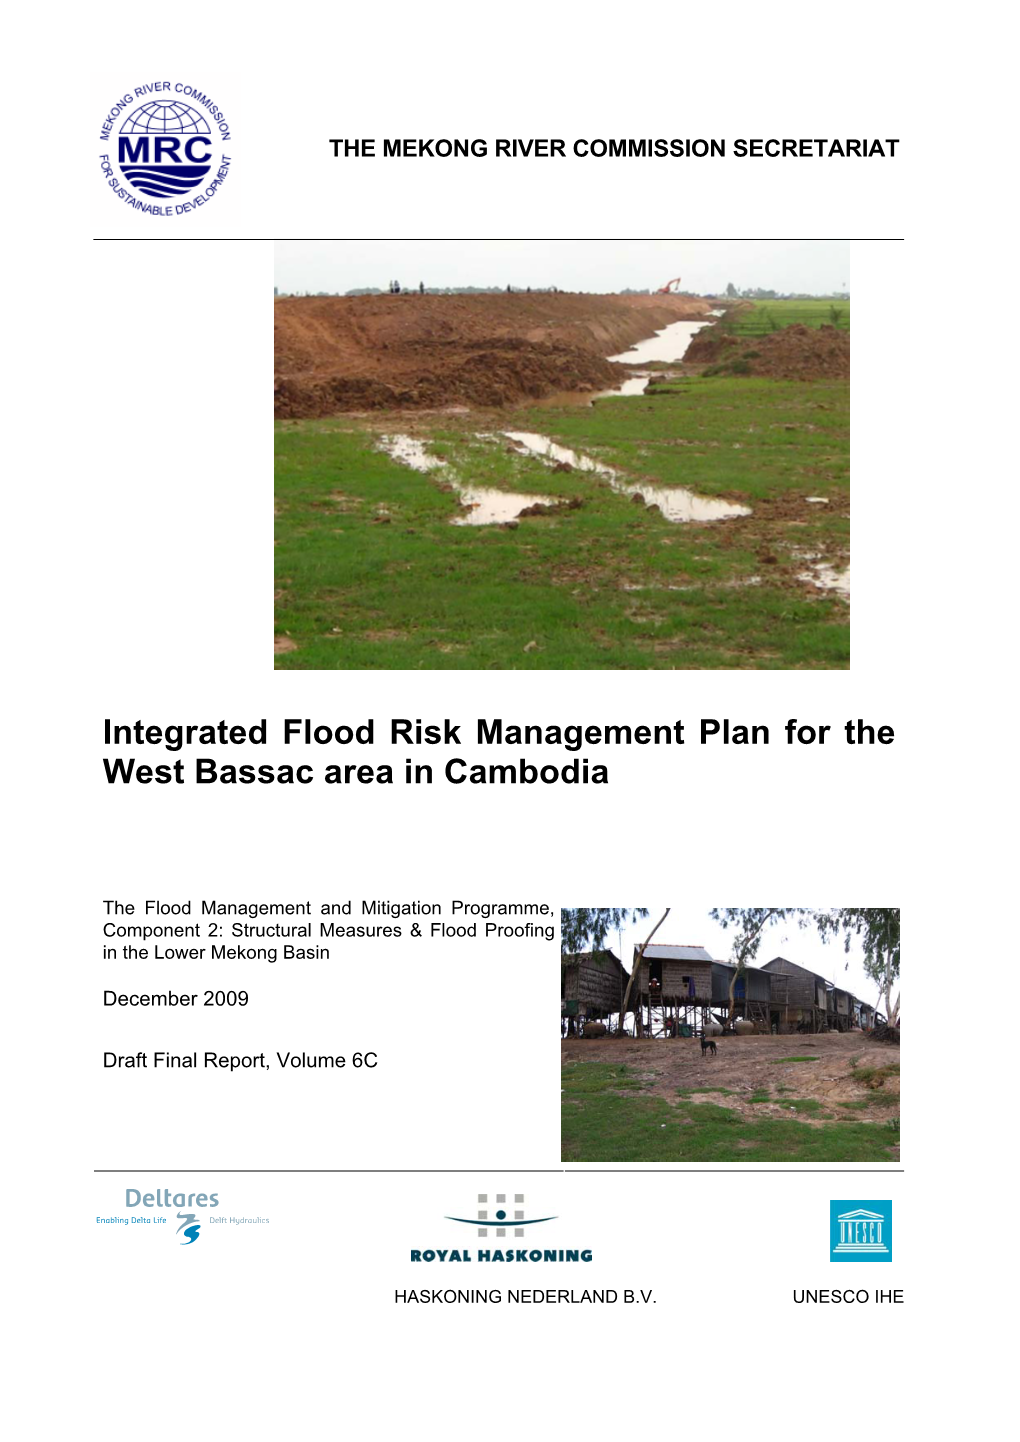 Integrated Flood Risk Management Plan for the West Bassac Area in Cambodia